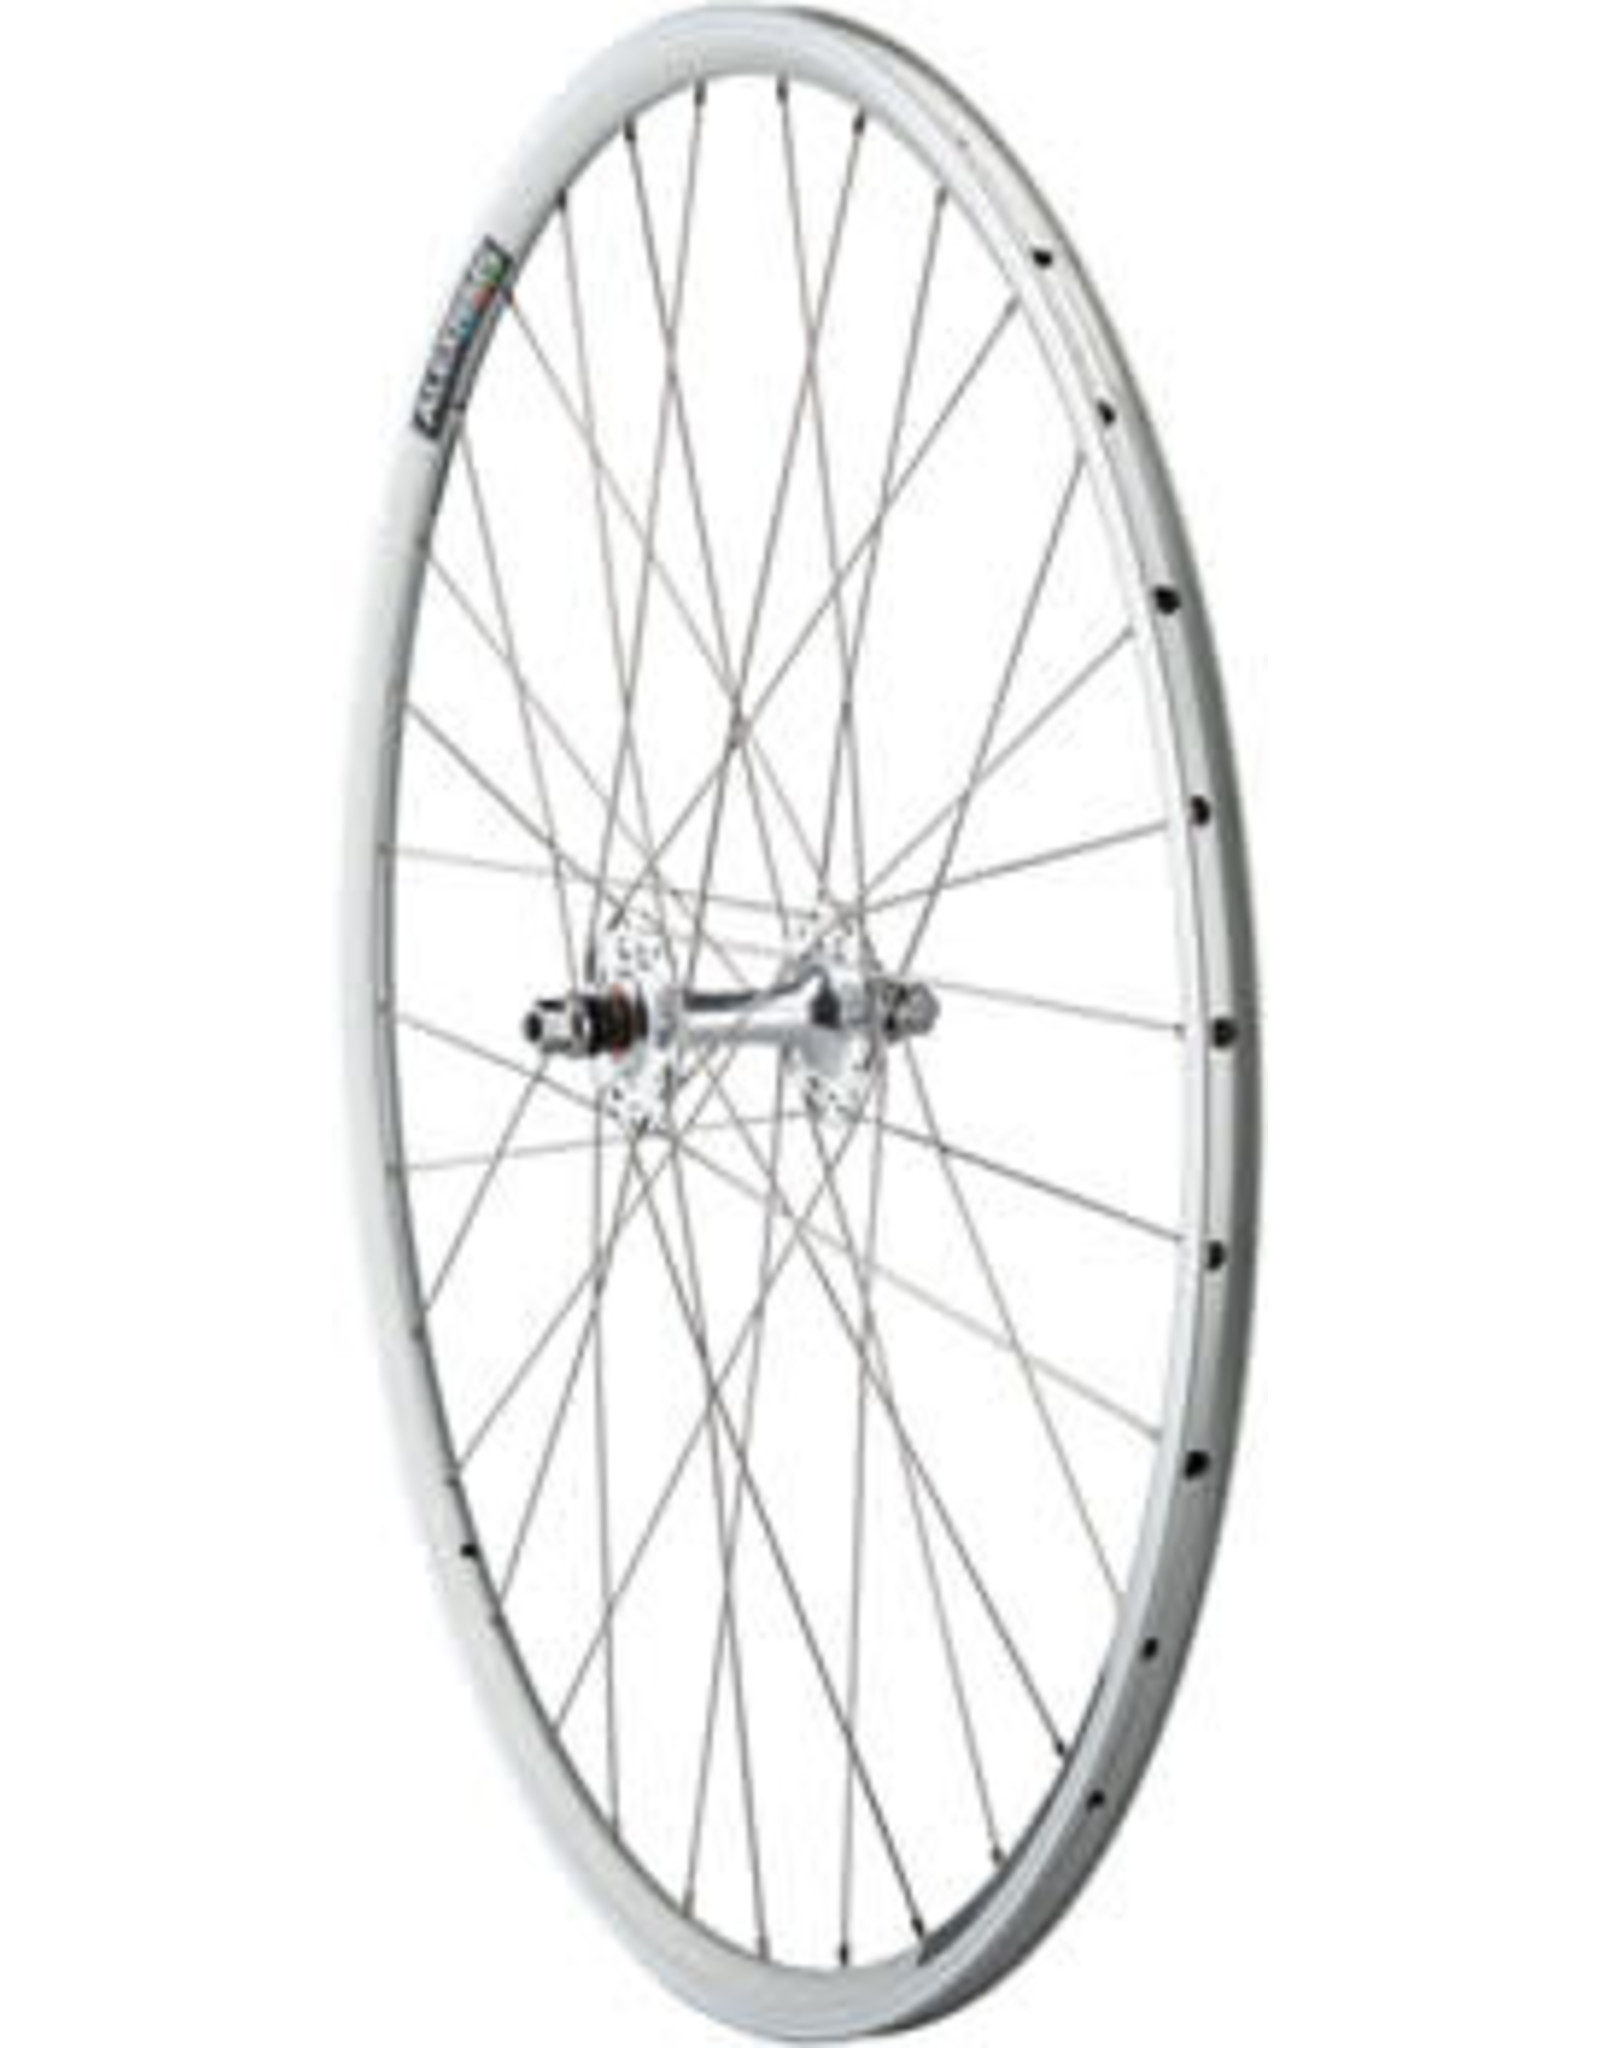 Quality Wheels Quality Wheels Value Double Wall Series Track Front Front Wheel - 700, 9x1 Threaded x 100mm, Rim Brake, Silver, Clincher, Cartridge